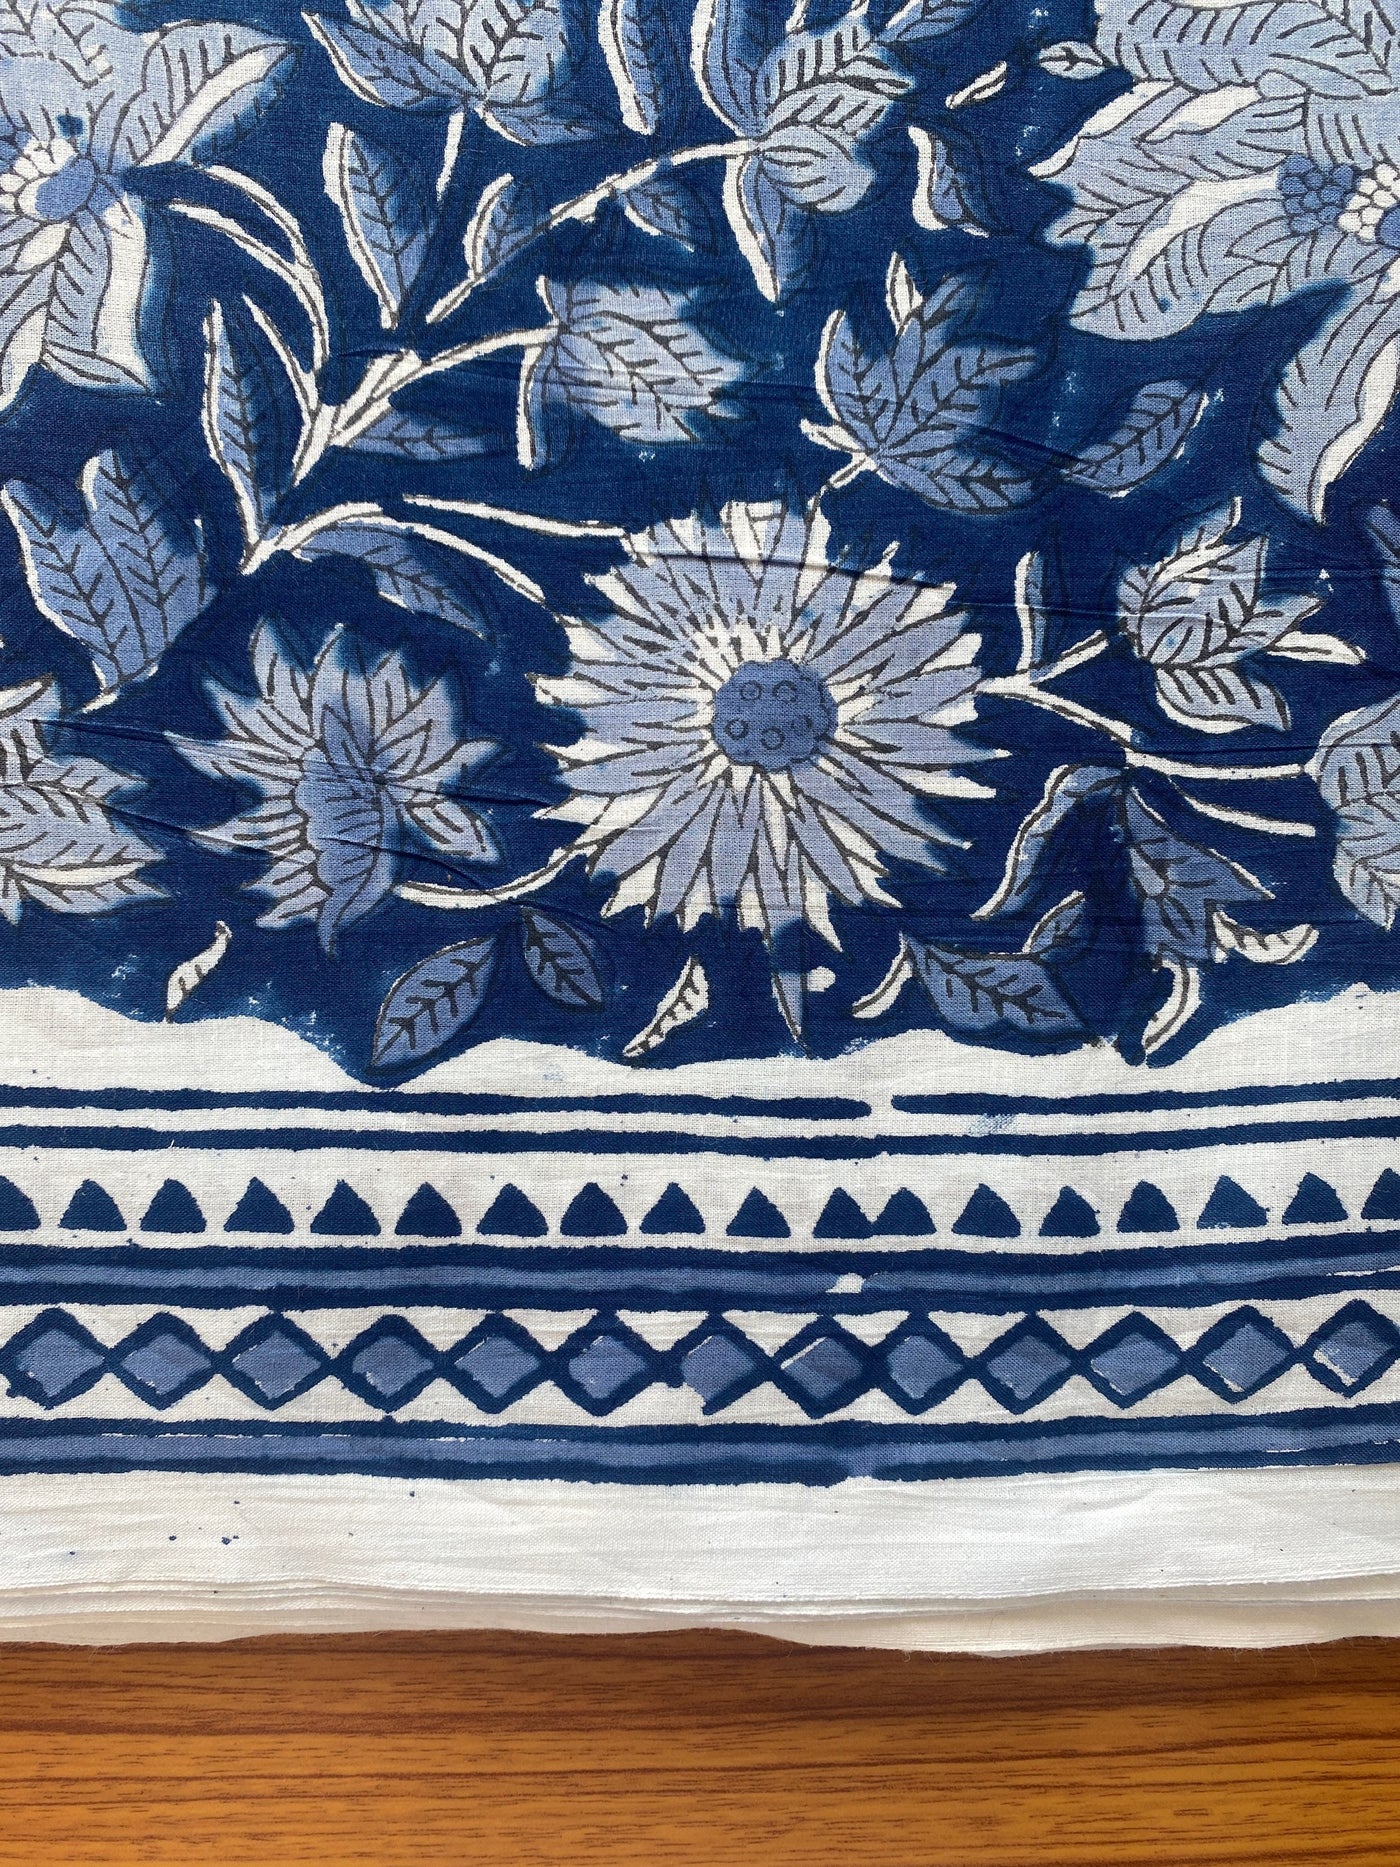 True Navy and Rain Stone Blue Indian Floral Hand Block Printed 100% Pure Cotton Cloth, Fabric by the yard, Fabric for Women's clothing Masks